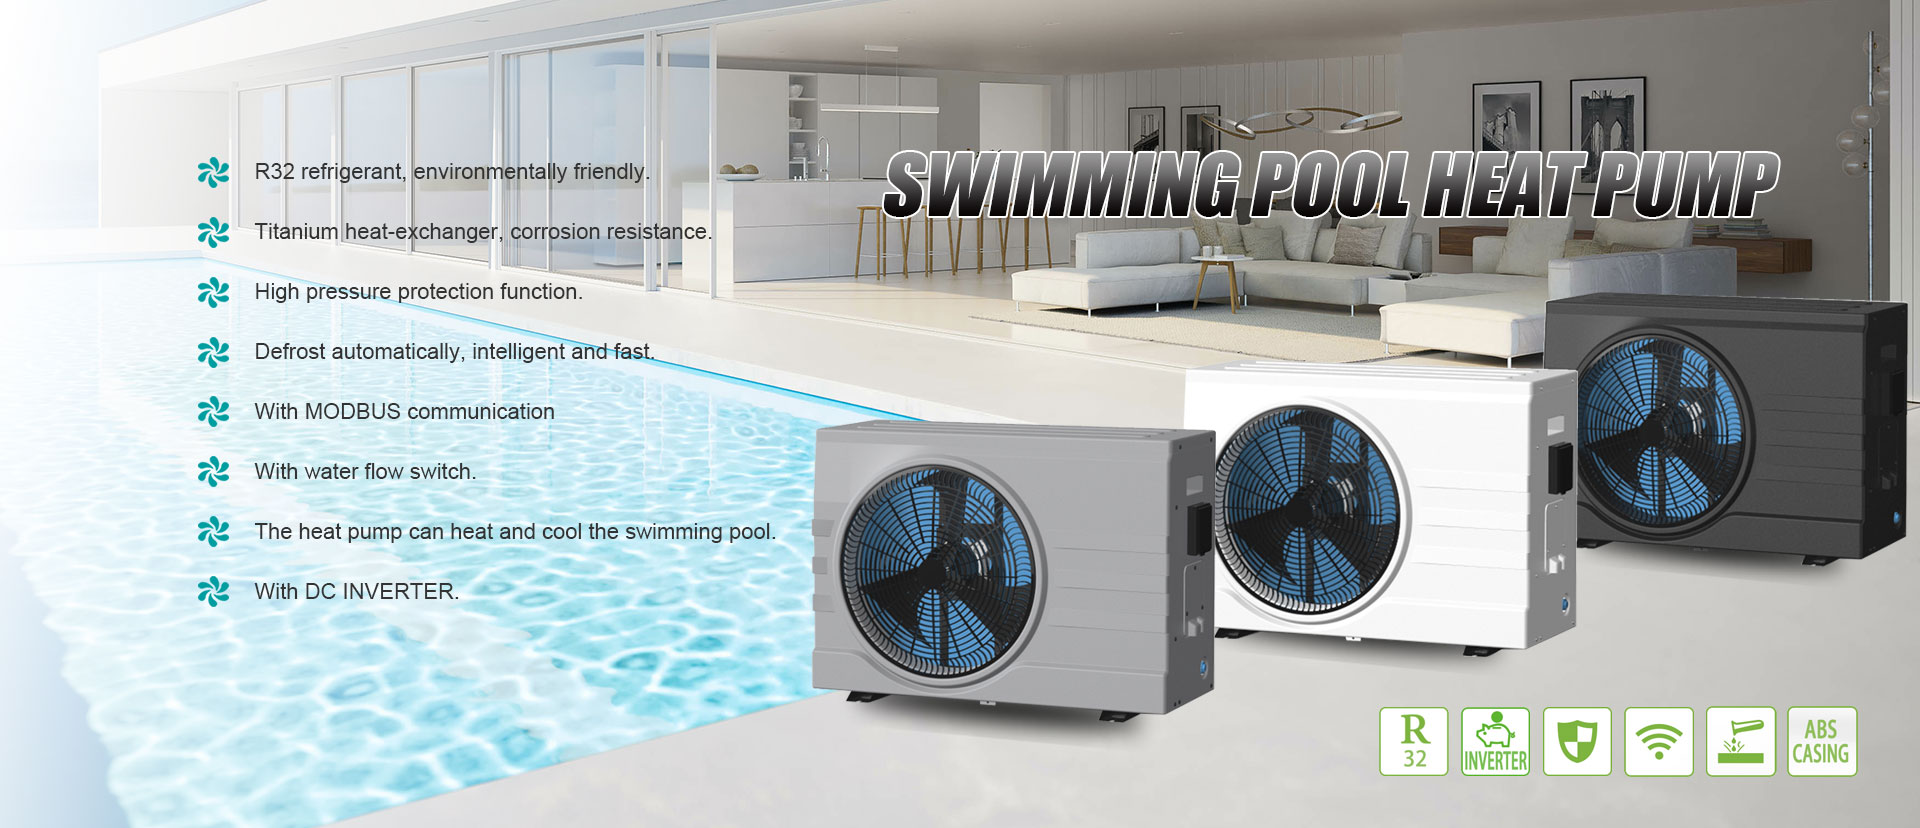 R410A Commercial Hot Water Heat Pump